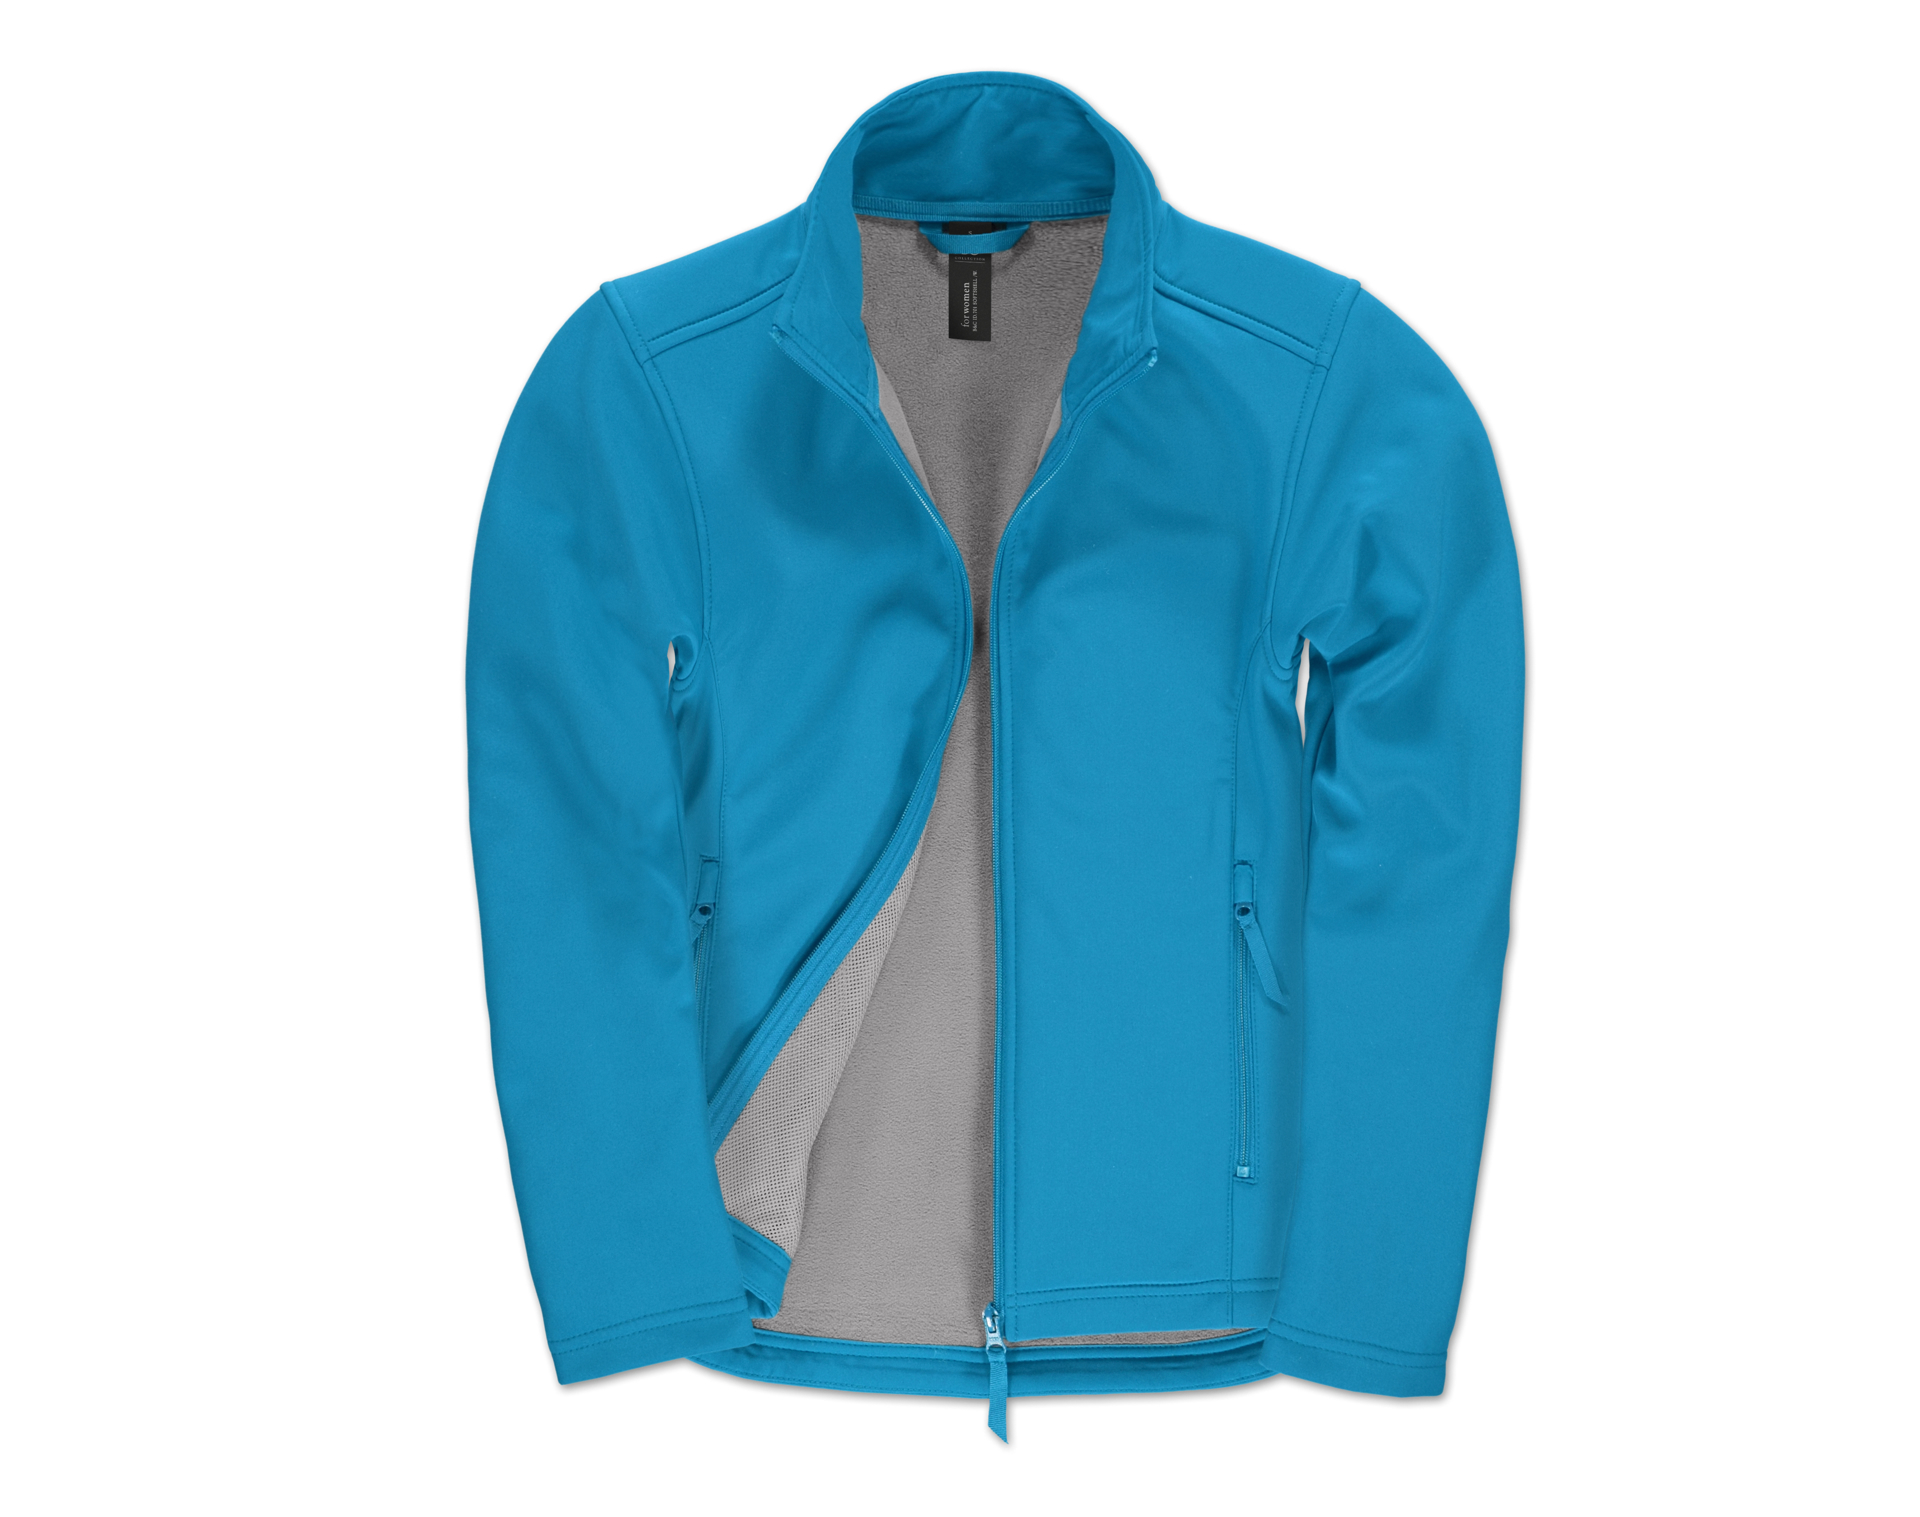 Womens ID 701 Softshell Jacket in blue with full front zip and grey inner fleece